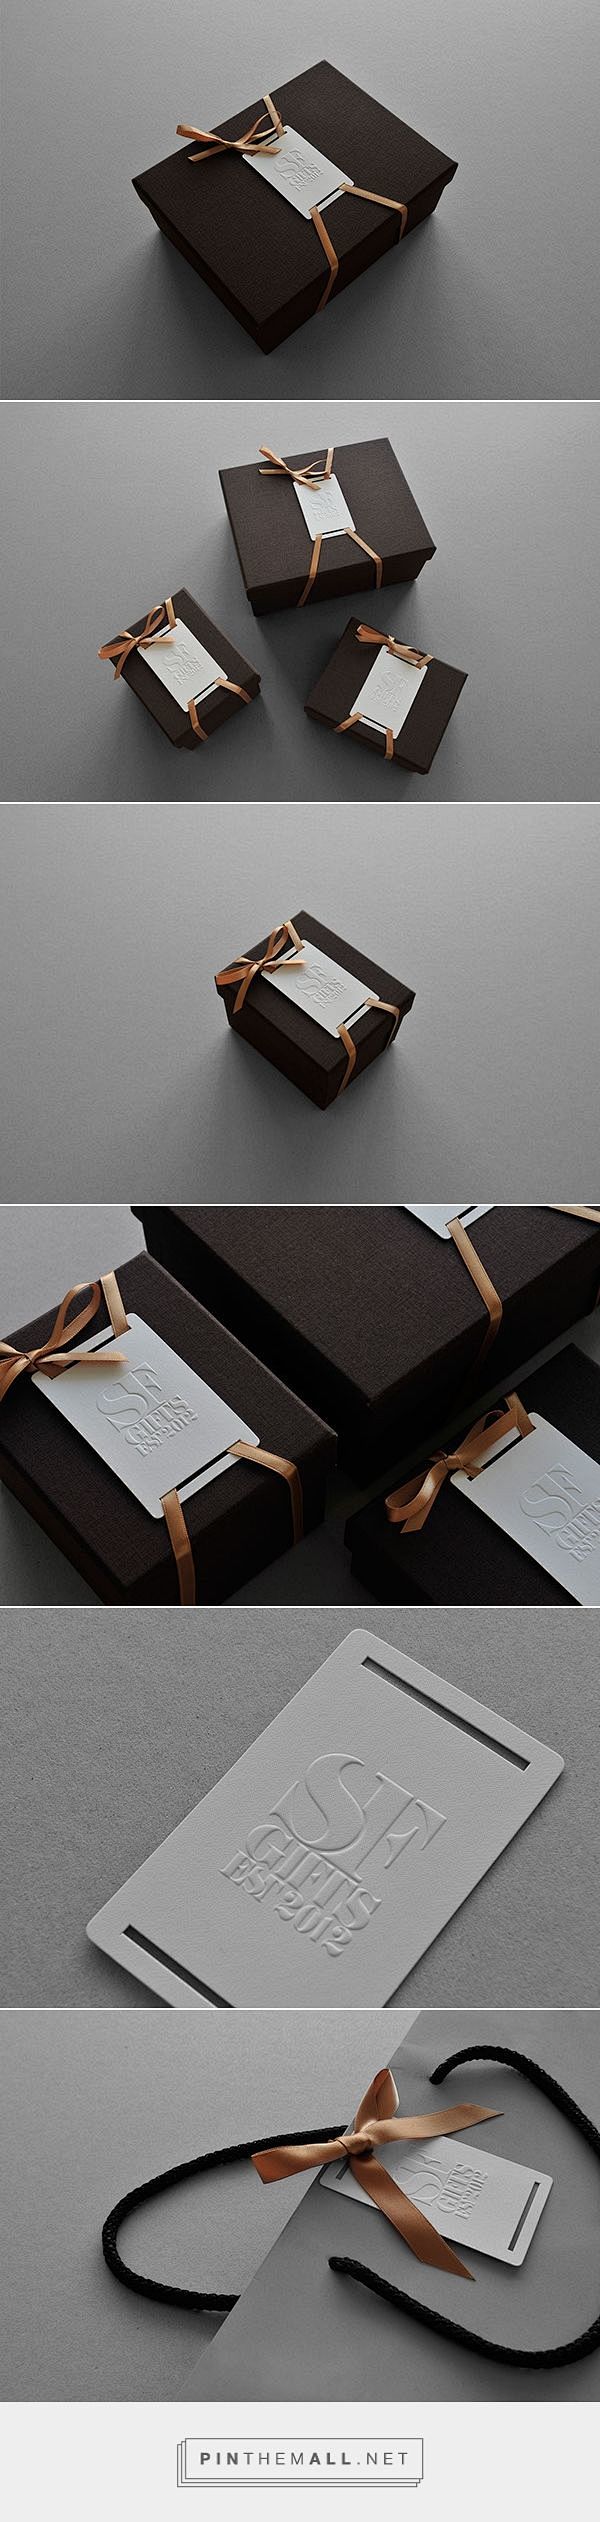 SF Gifts on Behance